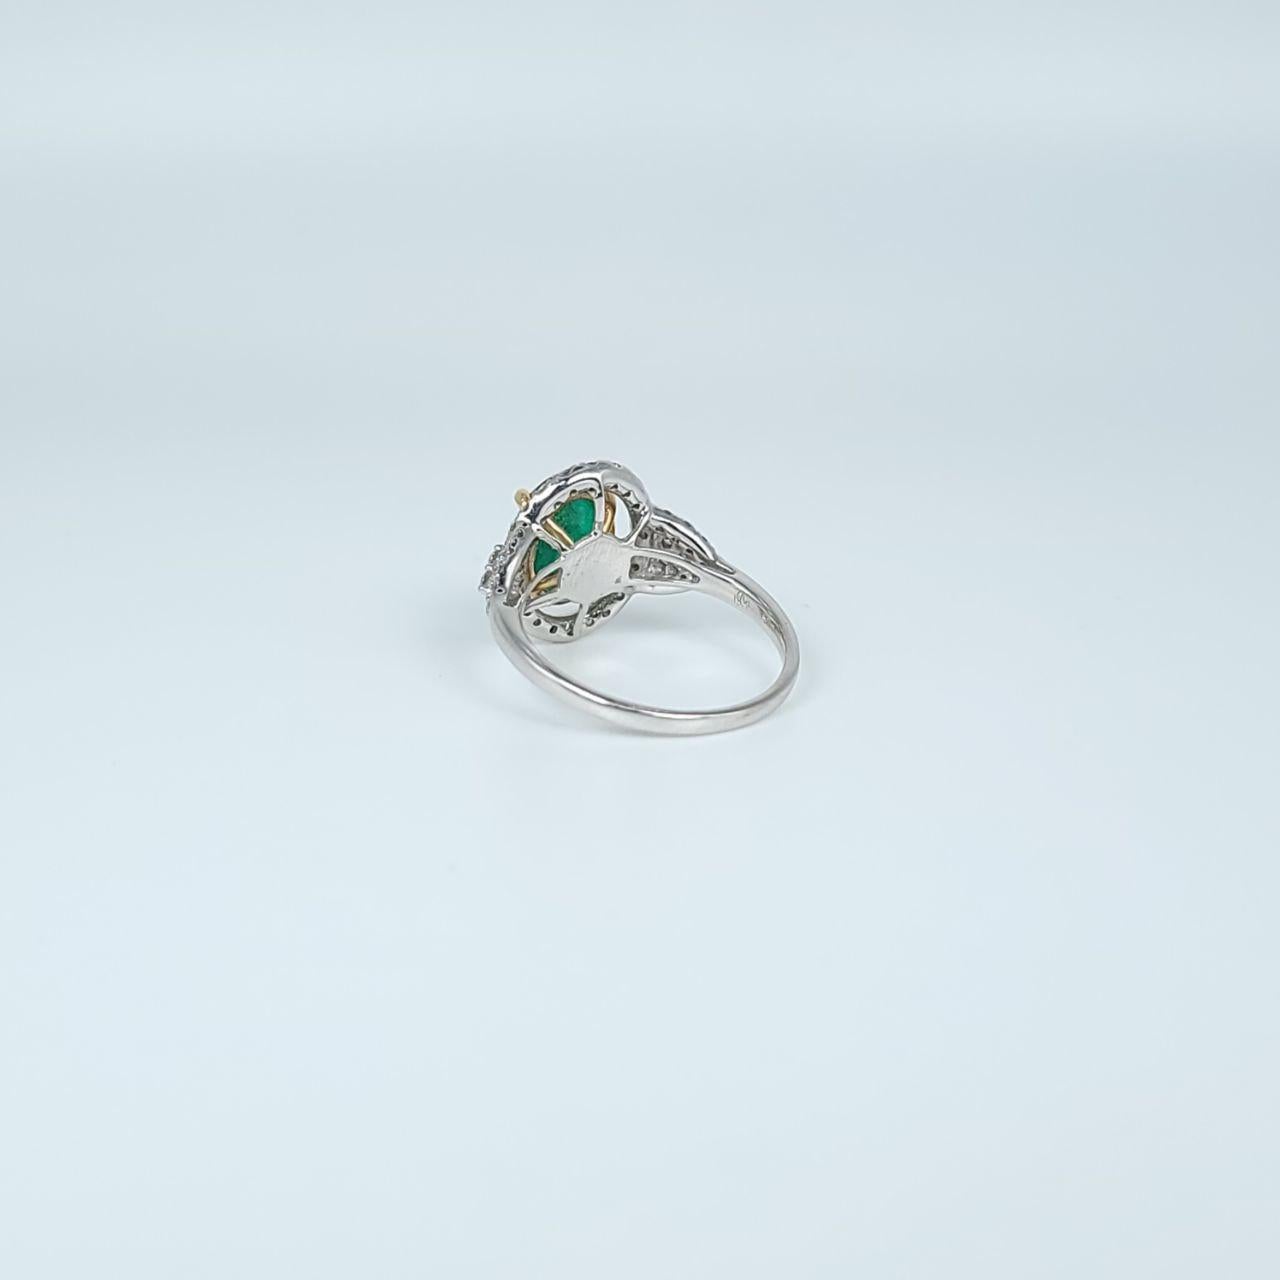 Emerald Diamond Ring Cocktail Diamond Ring with Large Brazilian Emerald For Sale 2